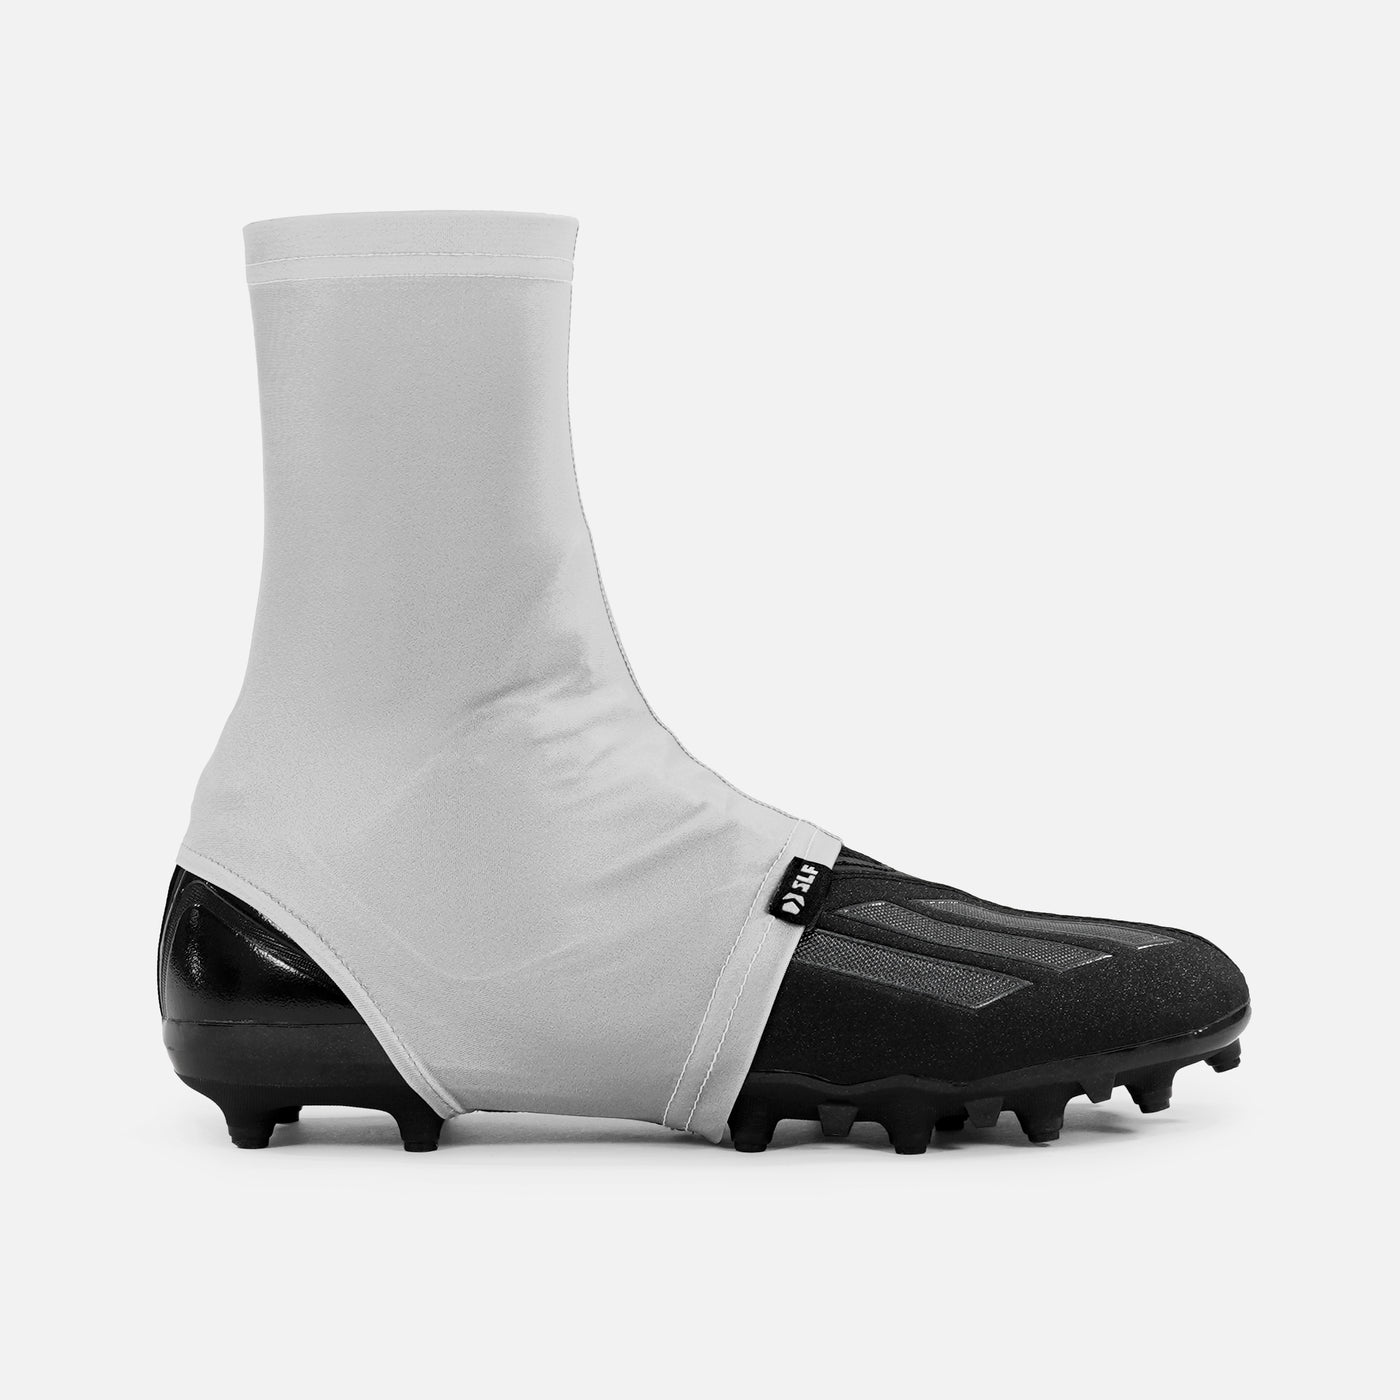 Hue Light Gray Spats / Cleat Covers